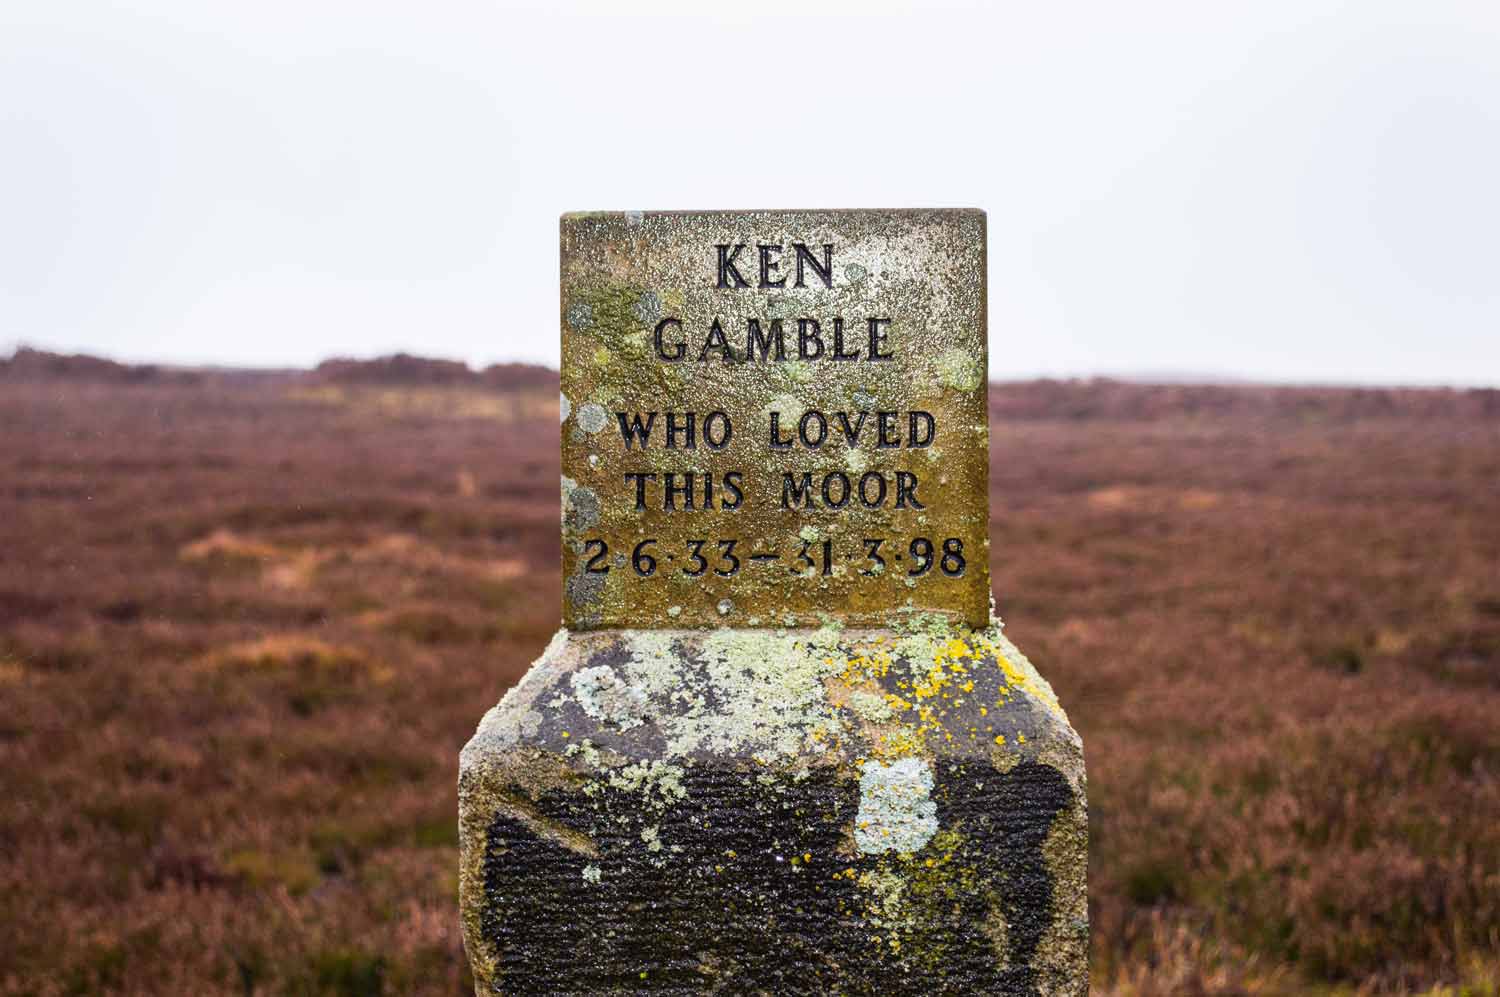 Michelle’s father Ken Gamble has a memorial on Dallowgill Moor, a place he loved